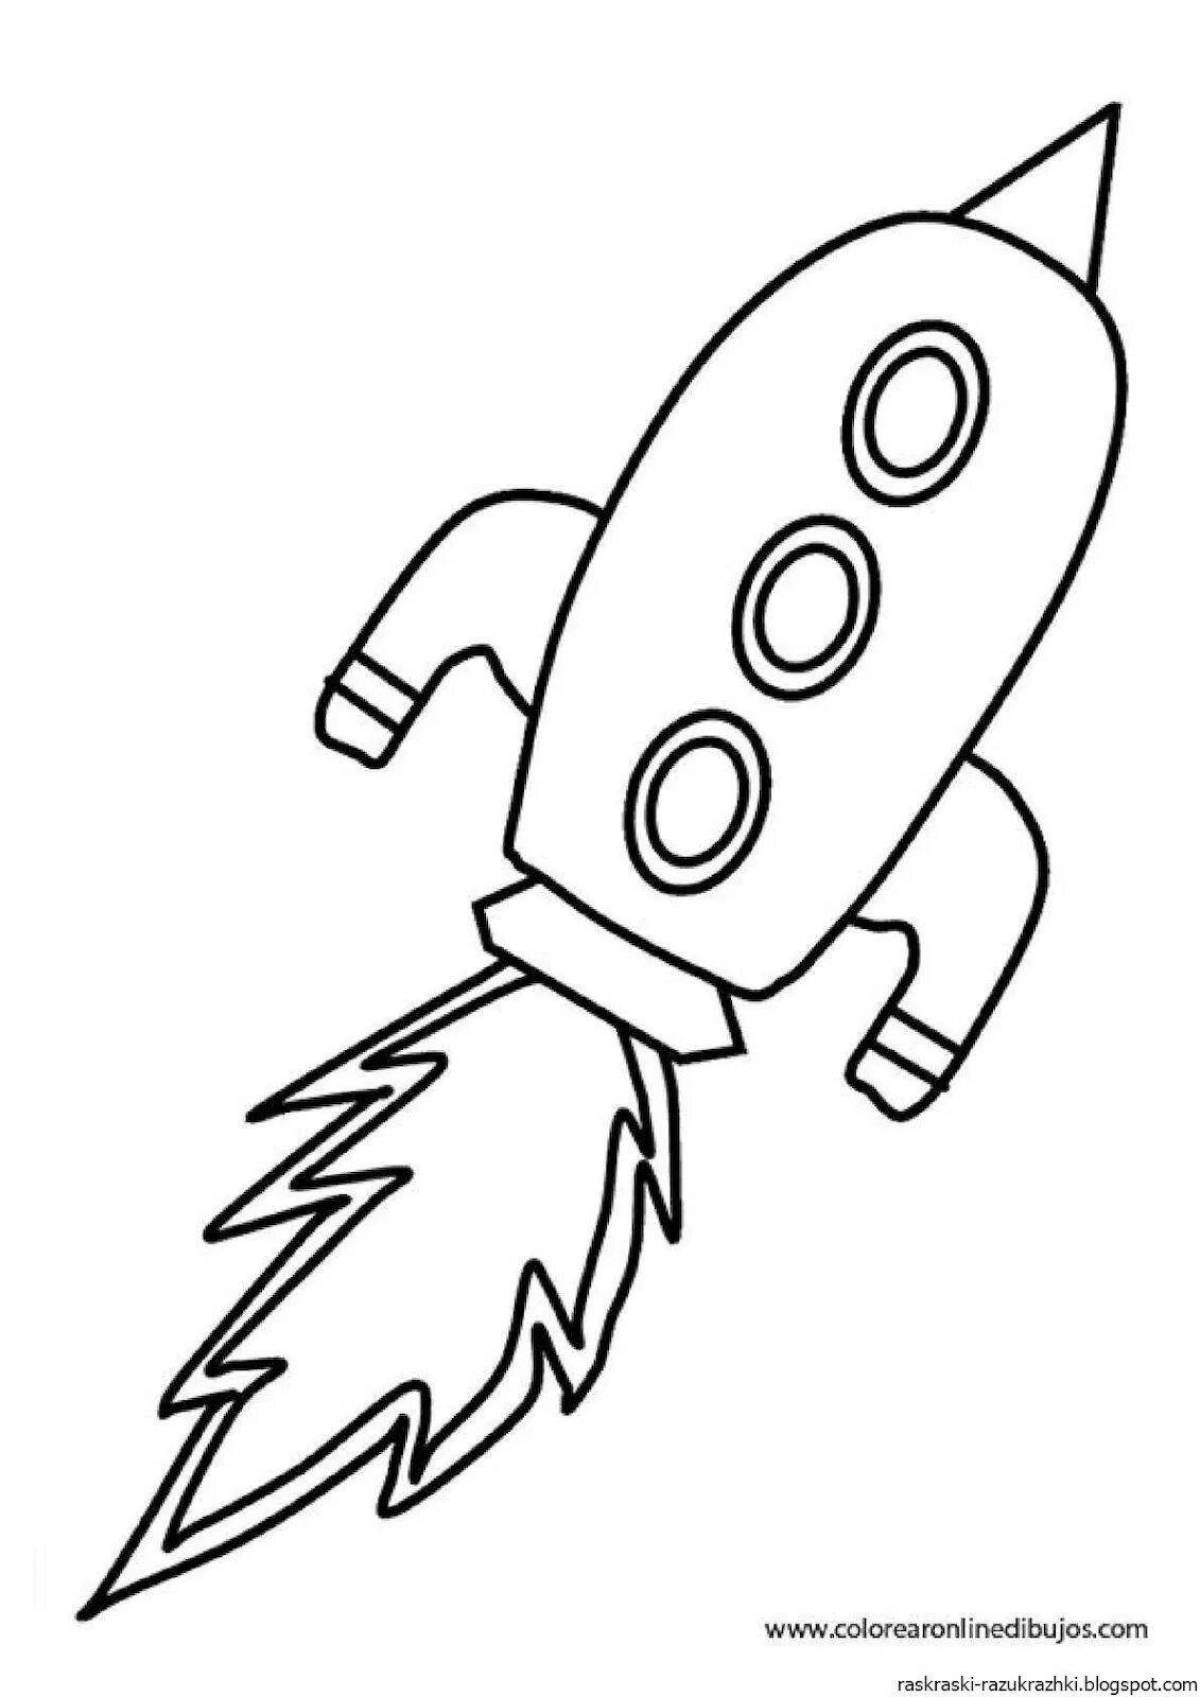 Lovely rocket coloring book for kids 5-6 years old